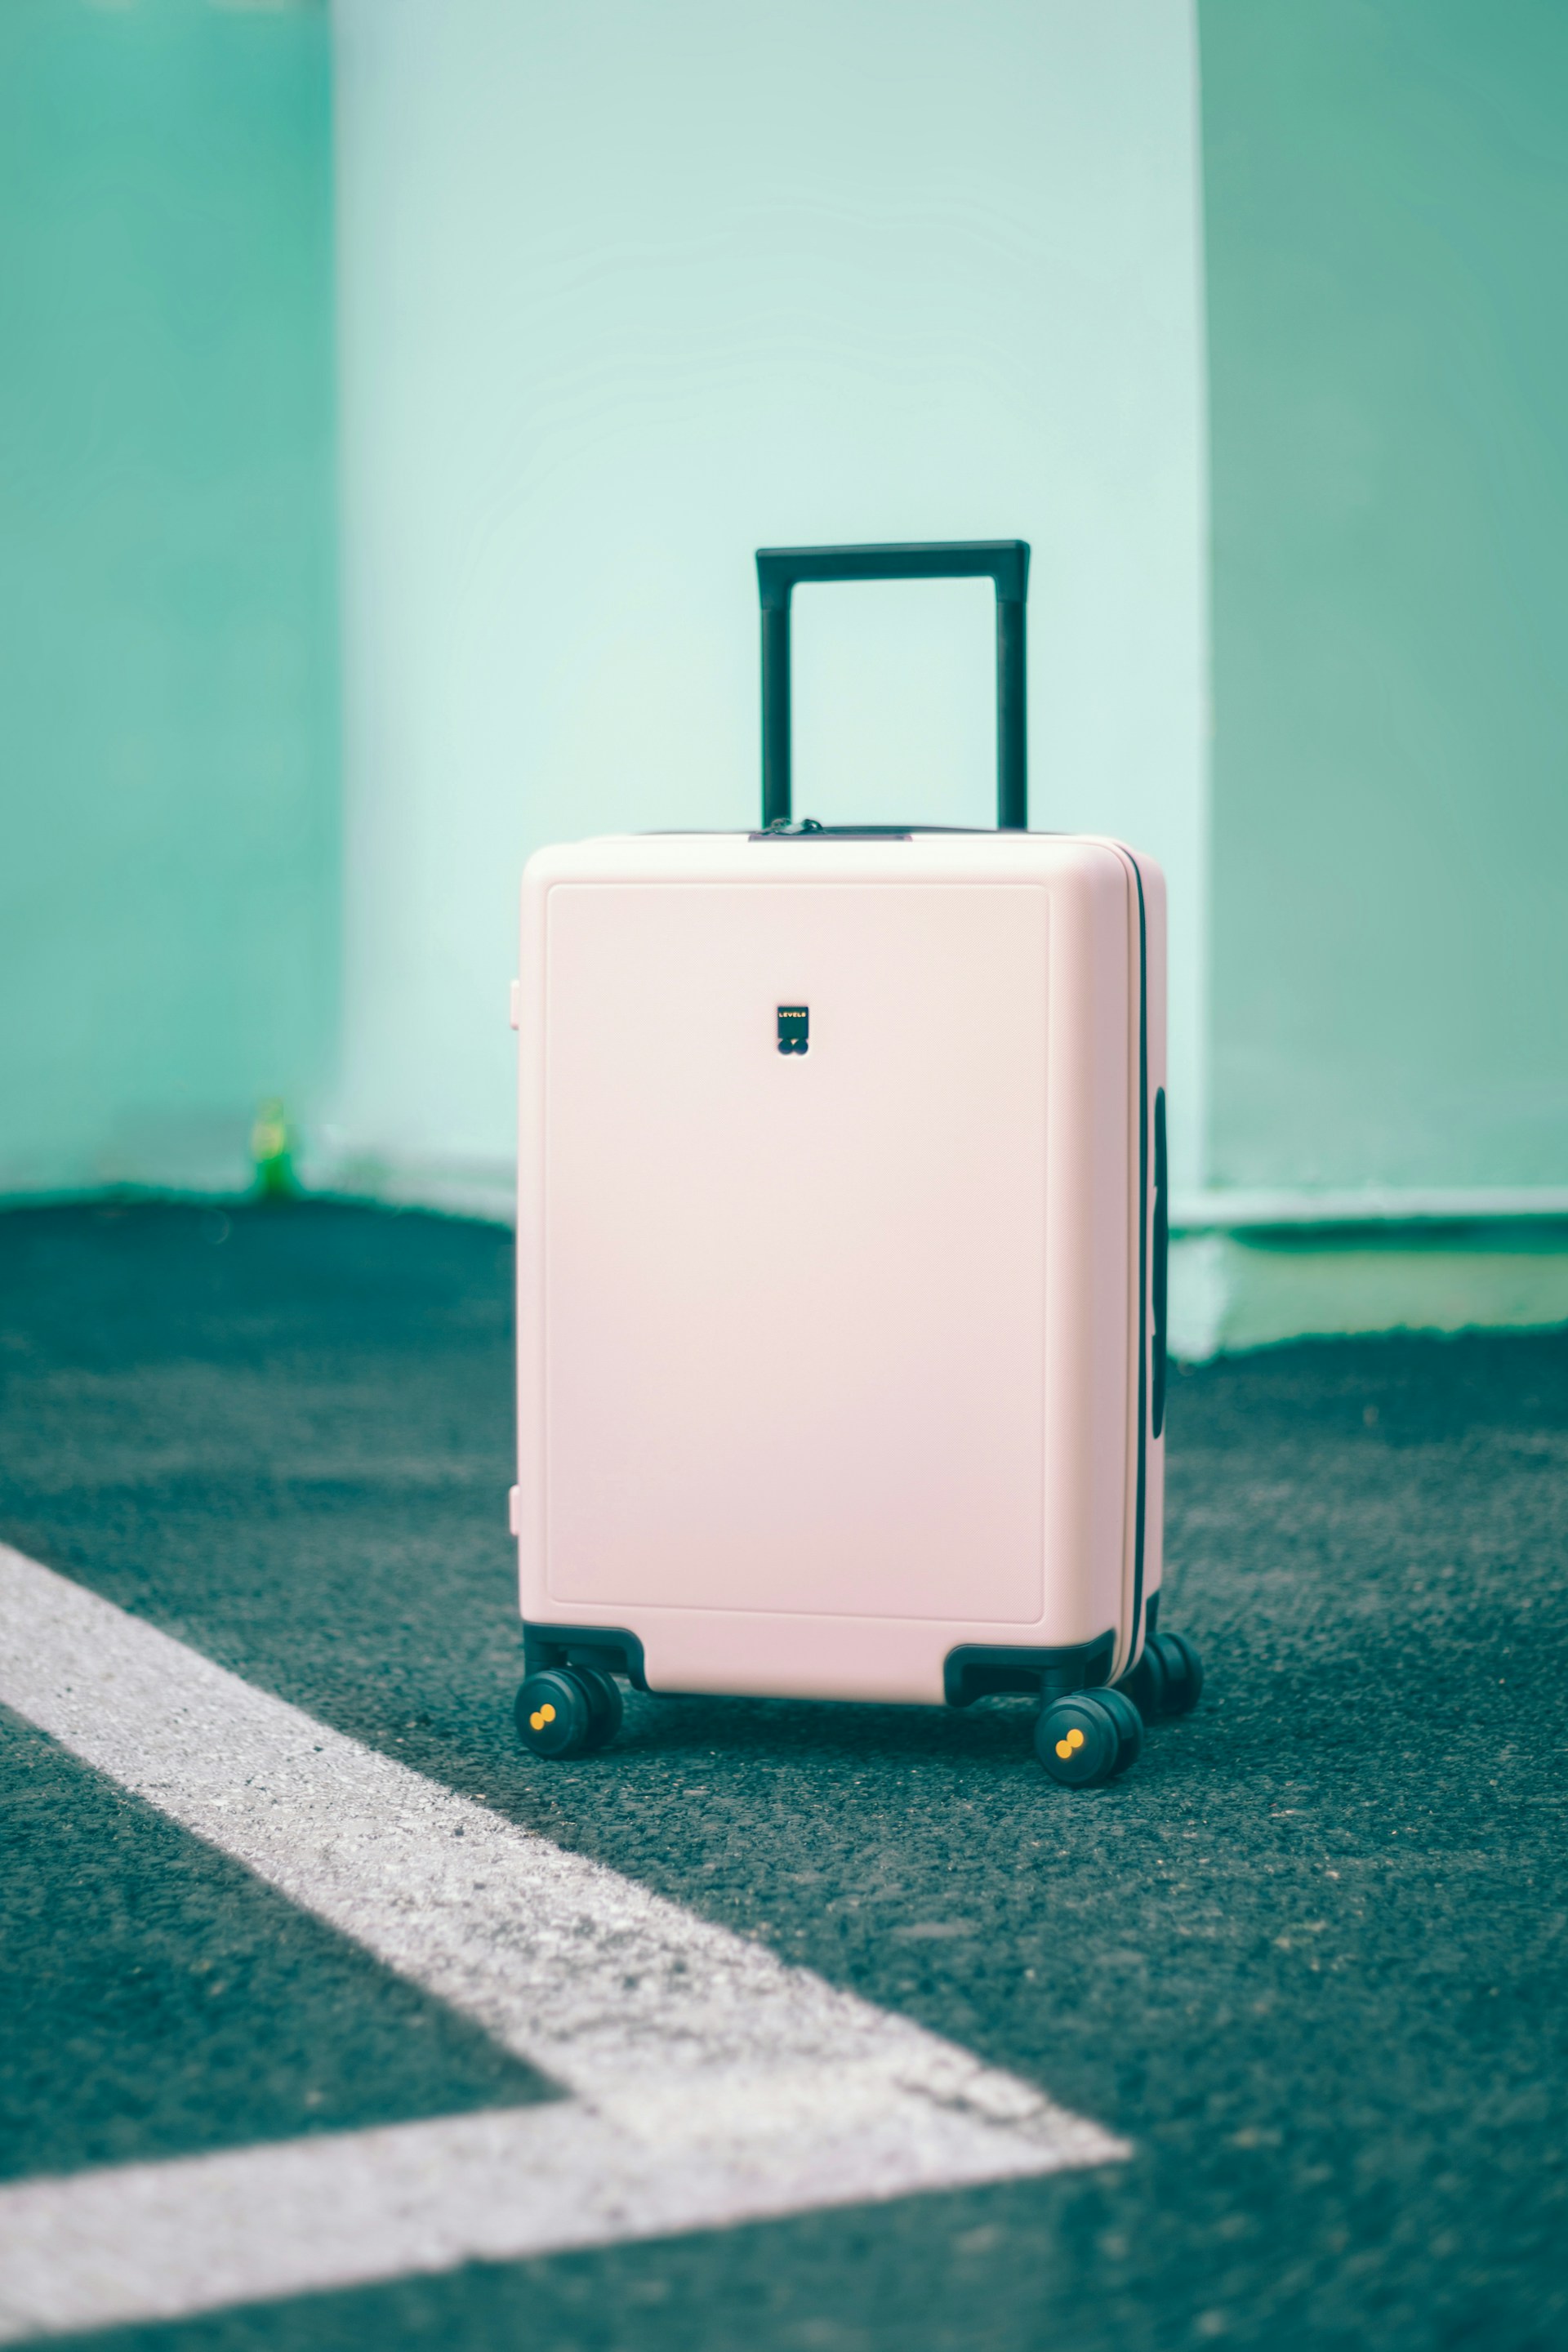 A packed suitcase | Source: Unsplash